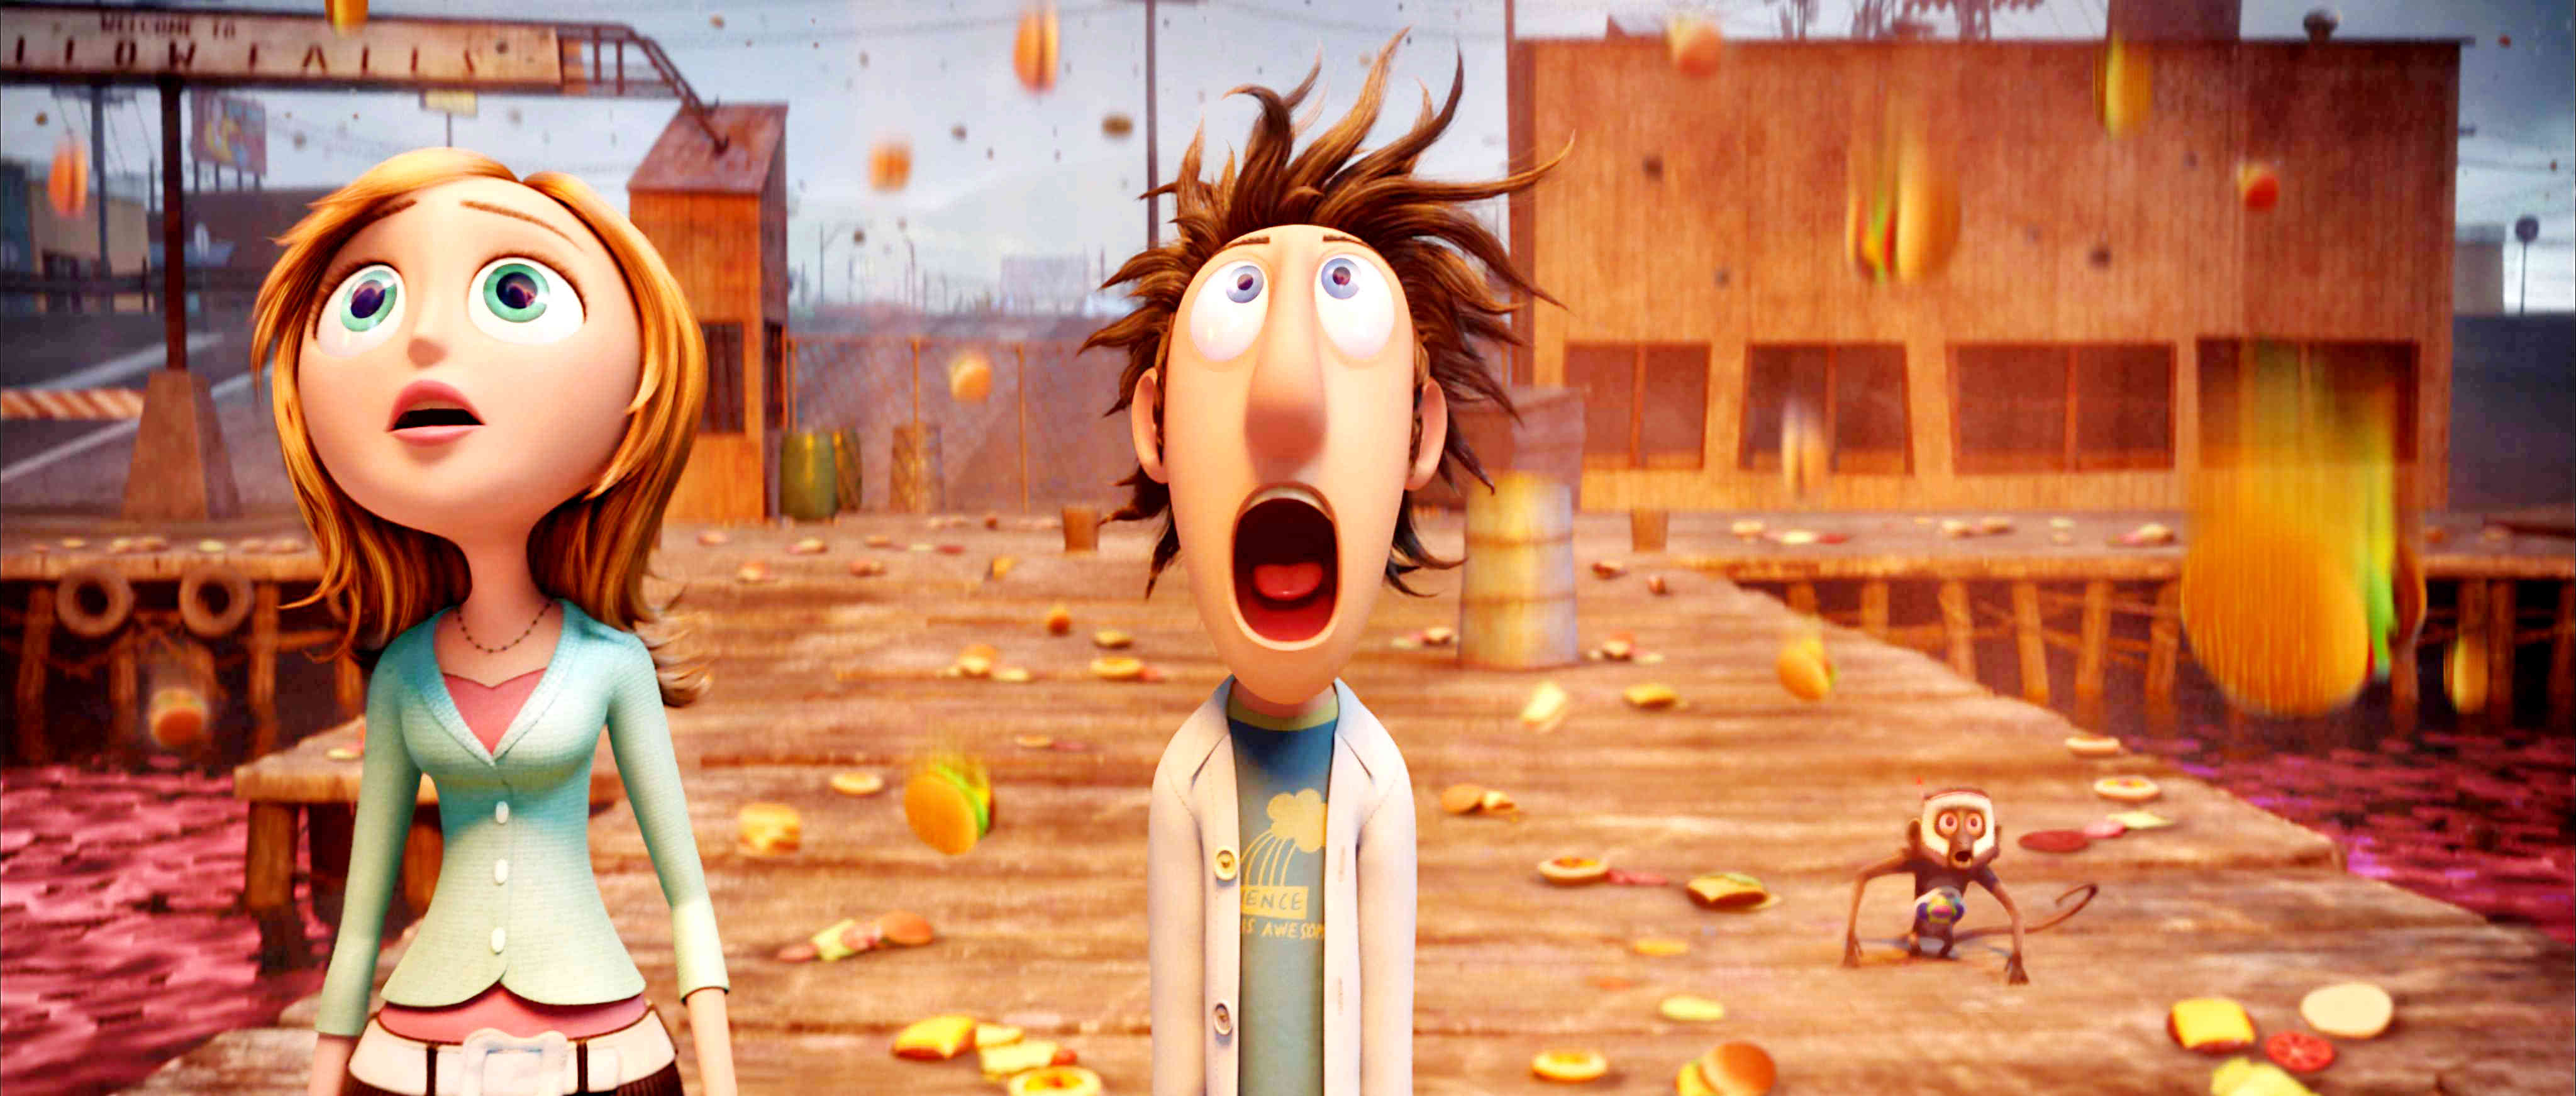 Nice Images Collection: Cloudy With A Chance Of Meatballs Desktop Wallpapers